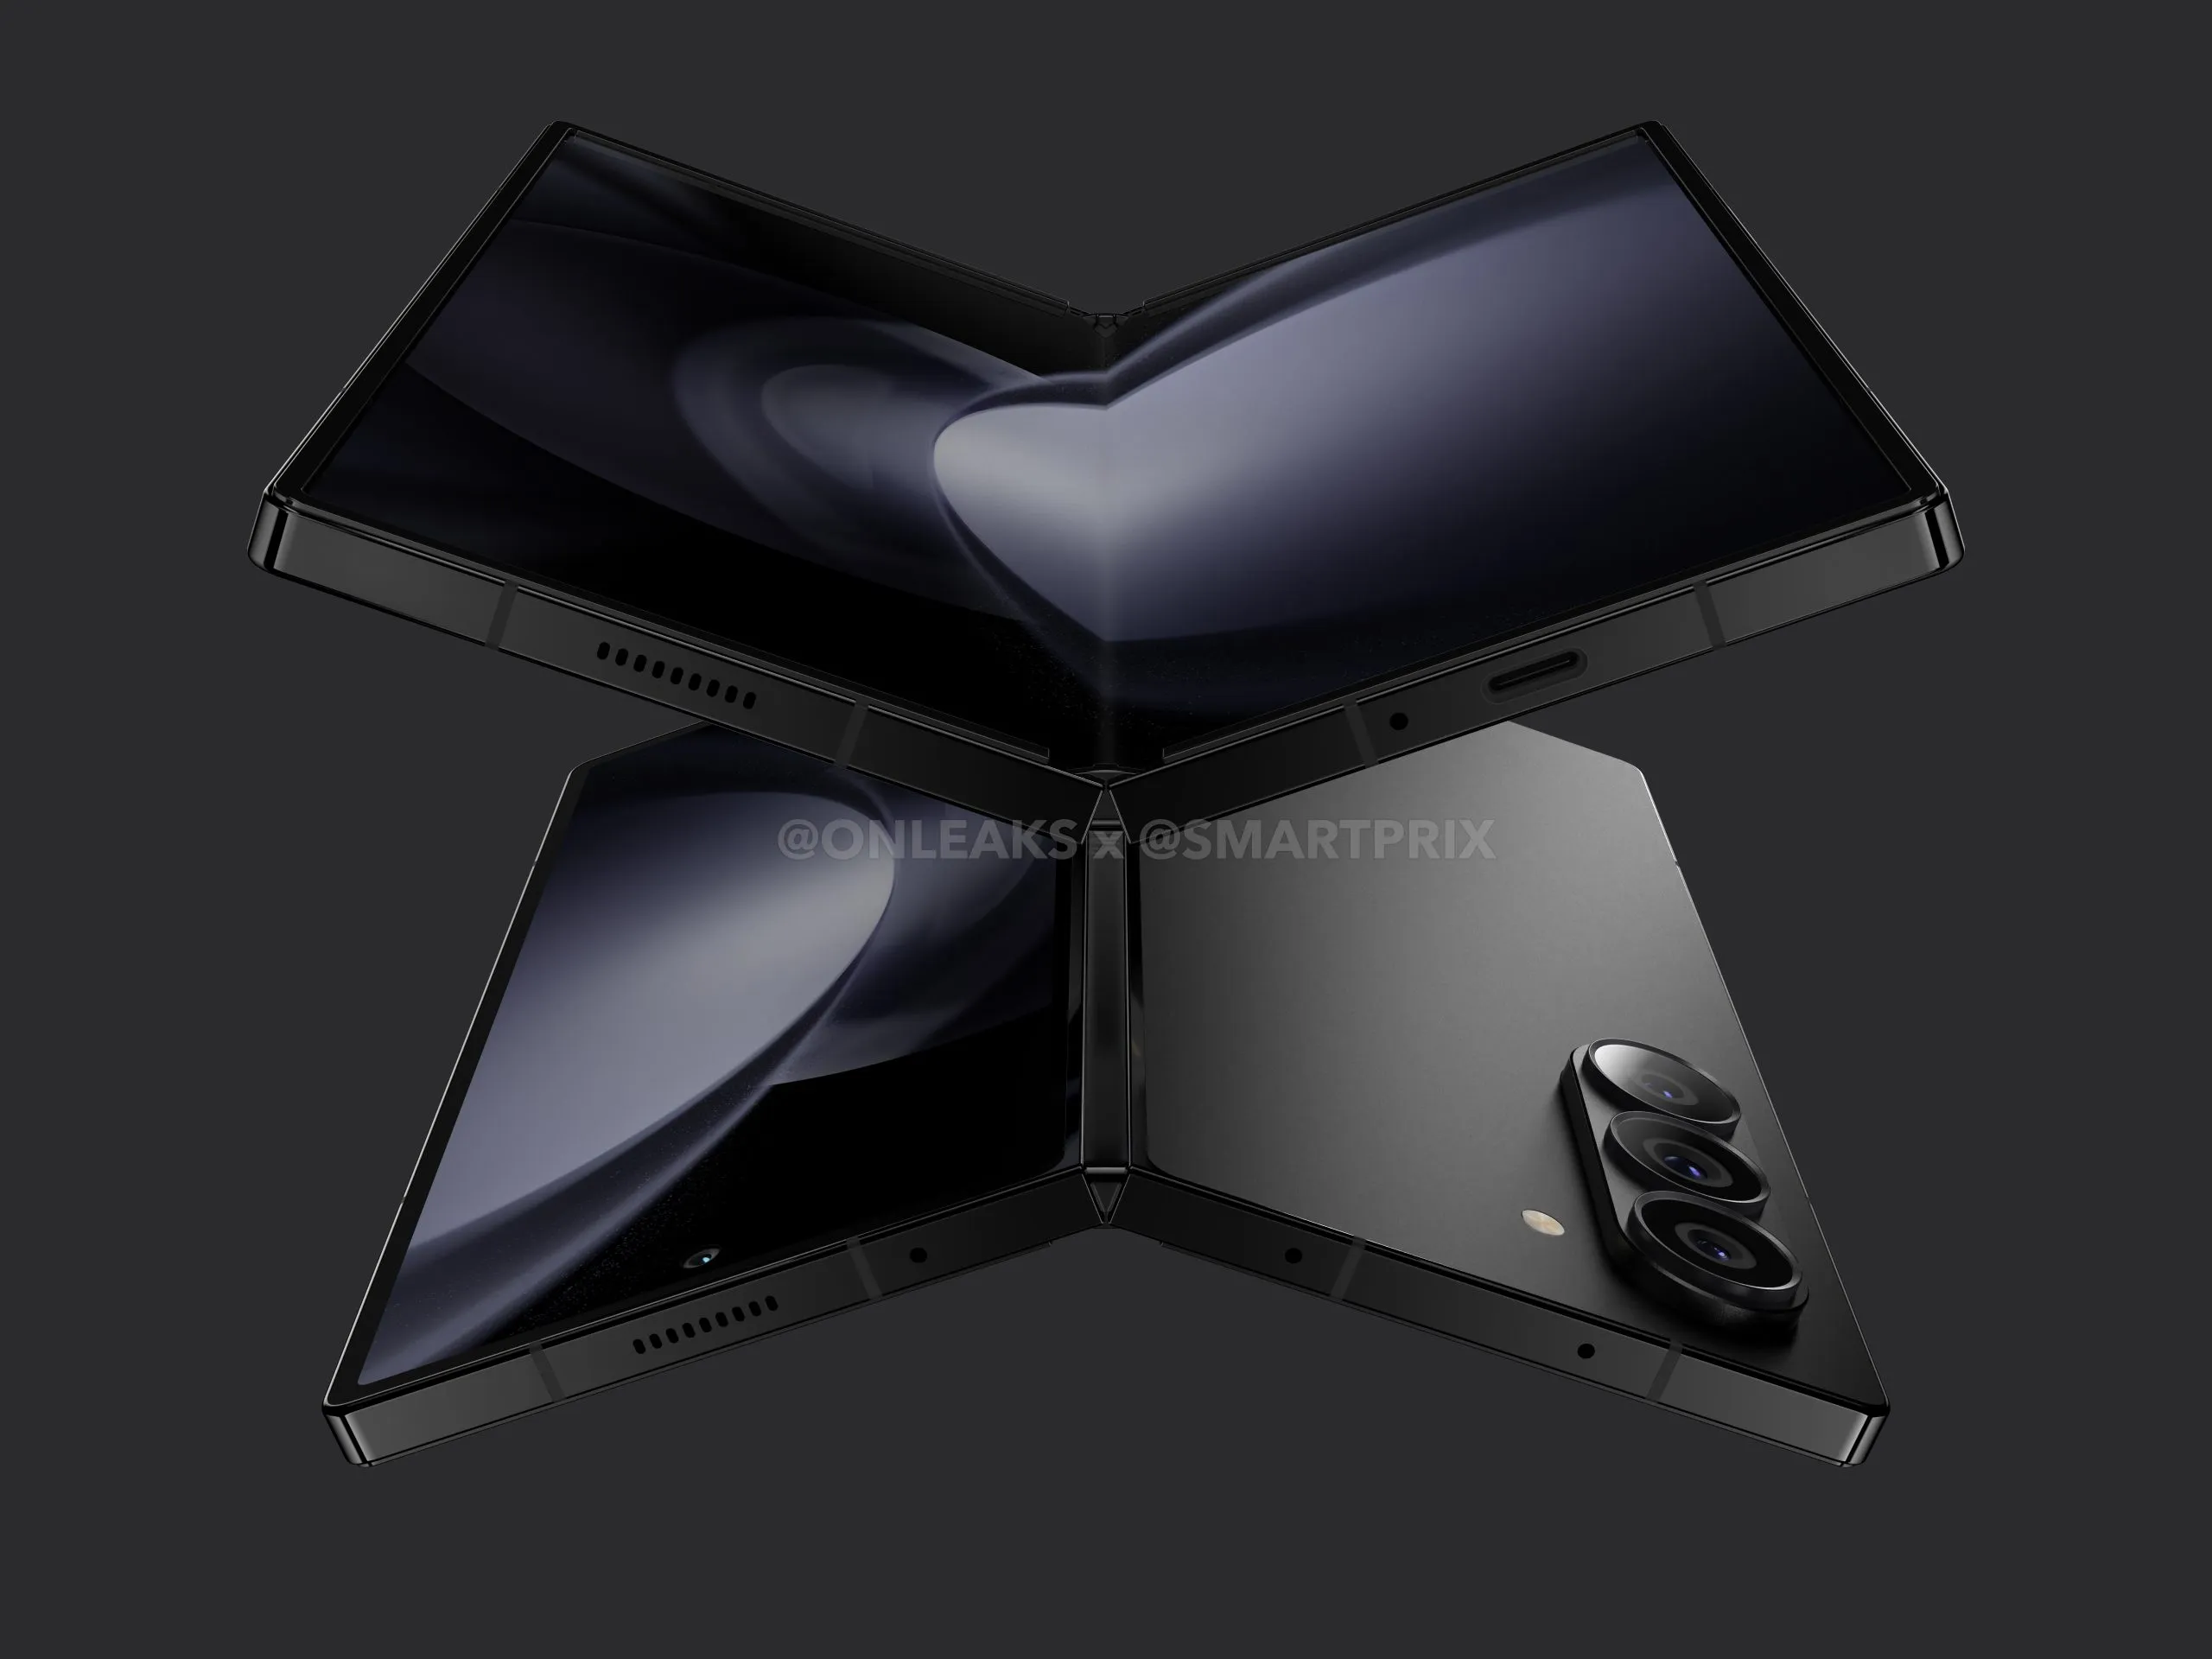 Unchanged: Samsung Galaxy Fold 6 foldable smartphone will get a 4400mAh battery and 25W charging